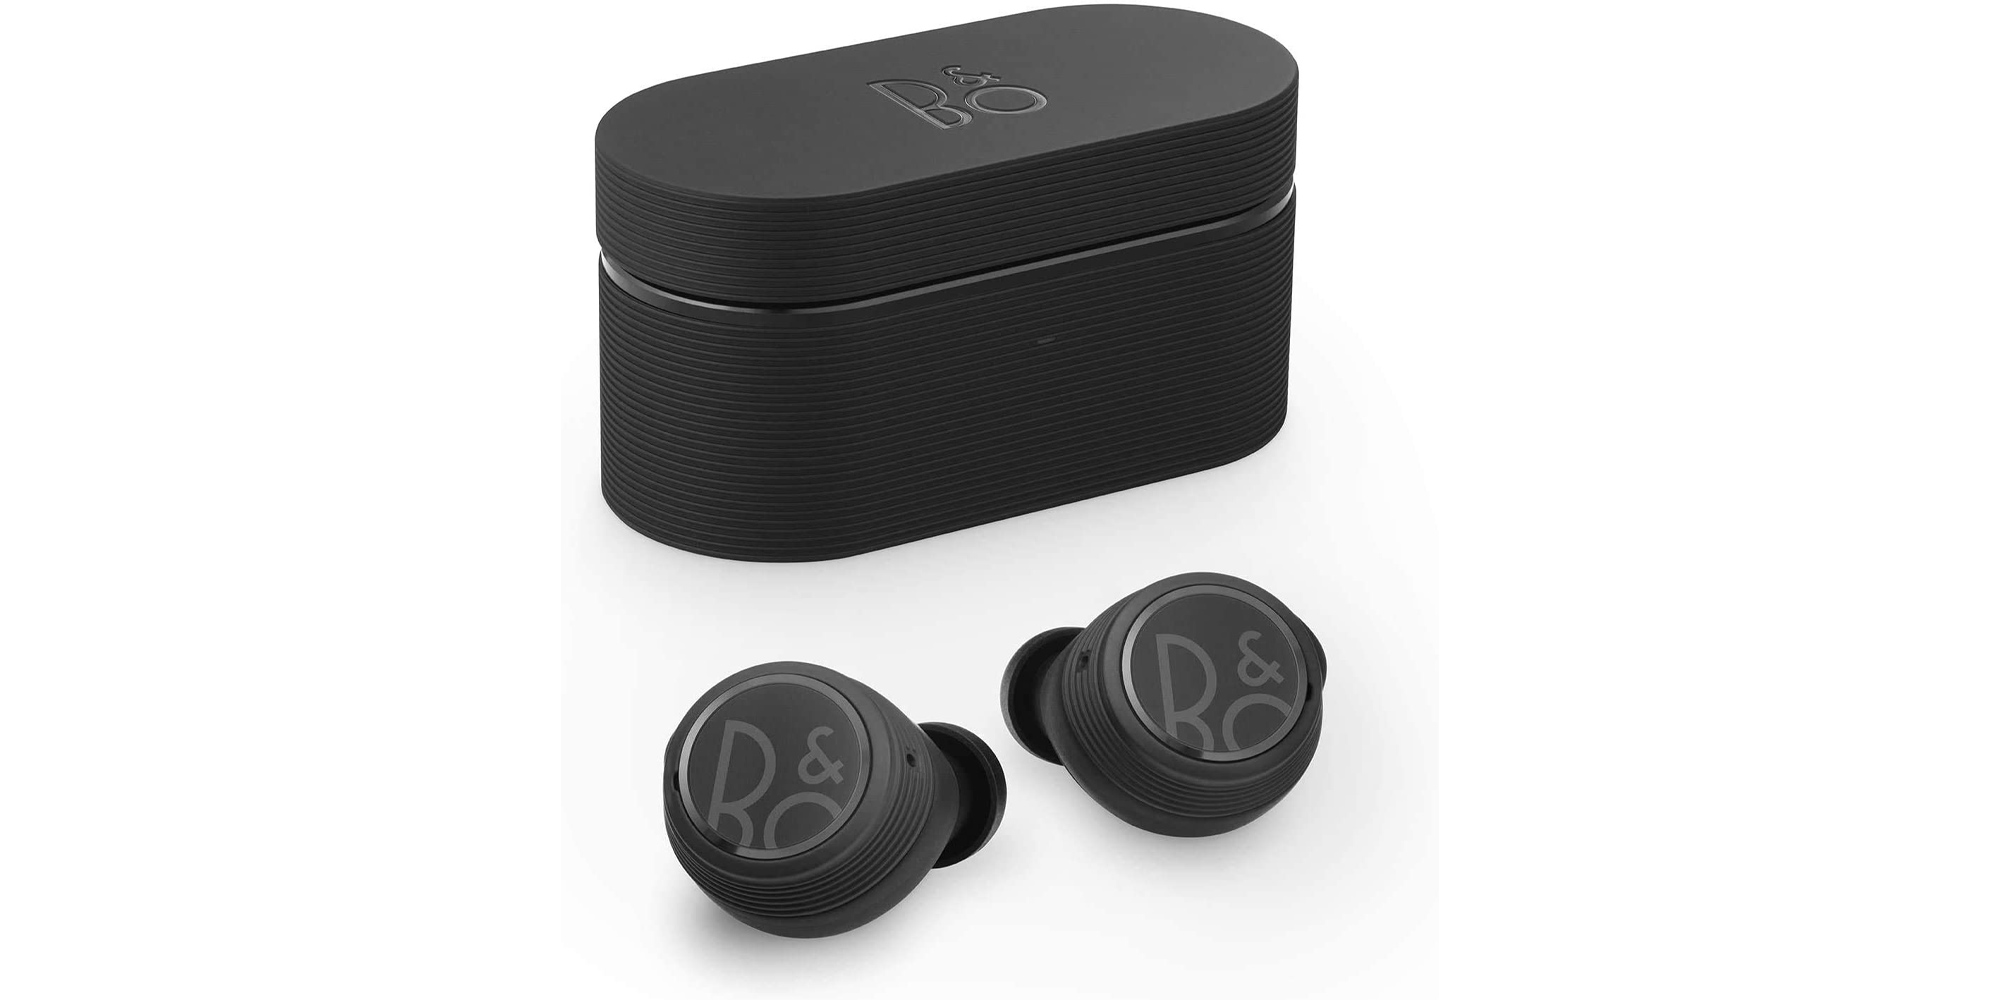 Bang & Olufsen's Beoplay E8 Sport true wireless earbuds are IP57